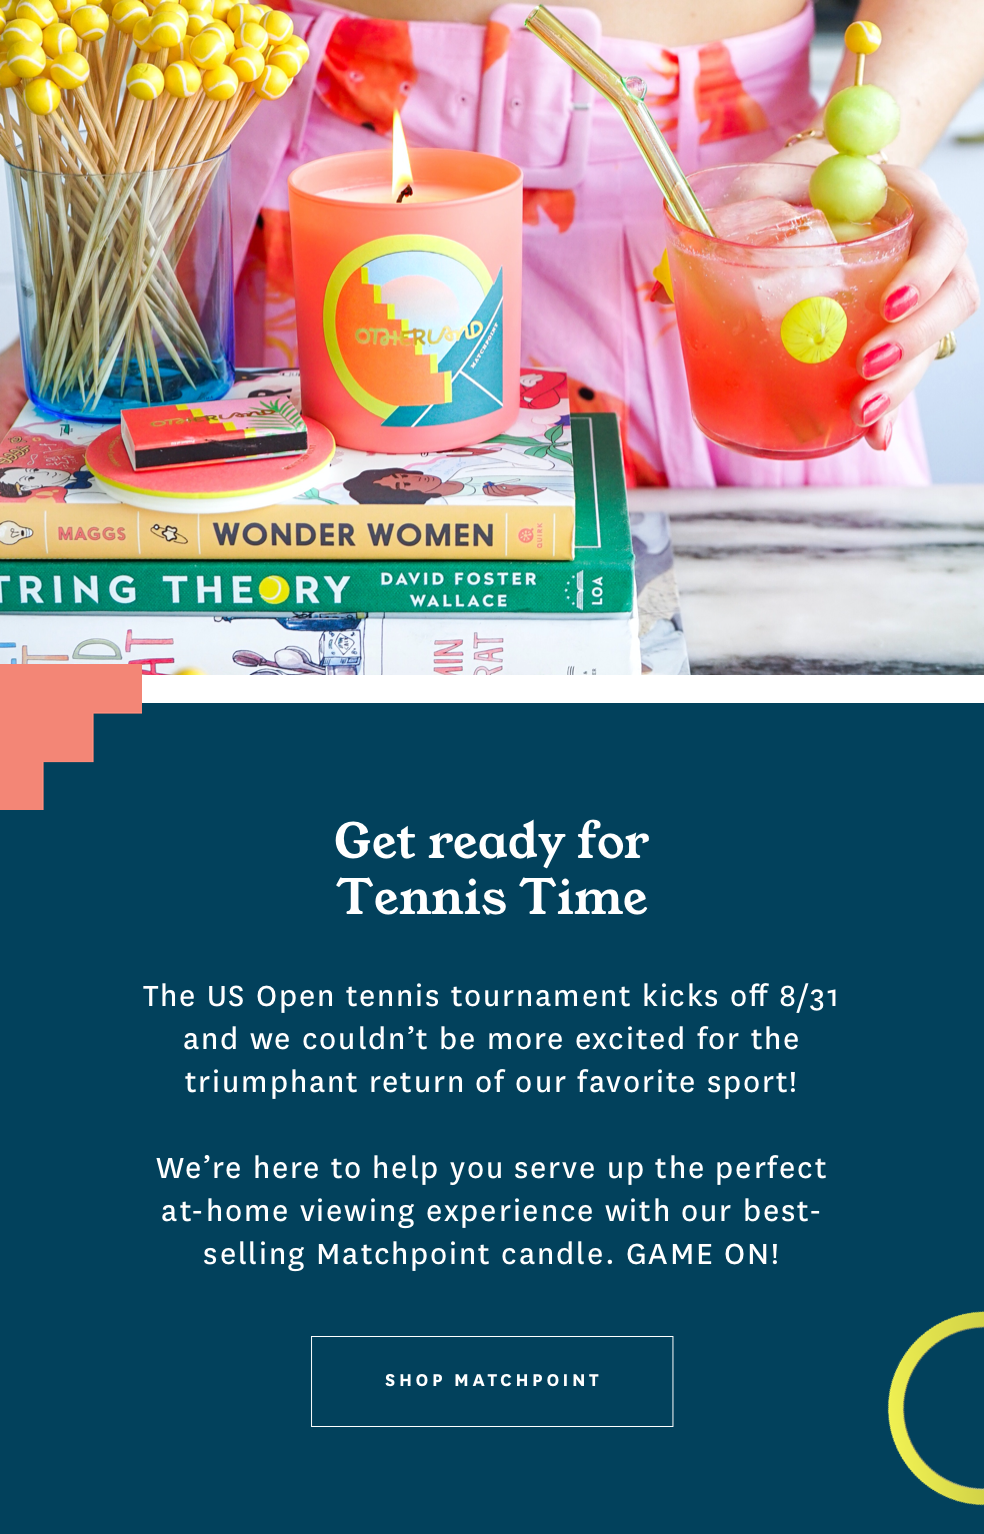 Get Ready For Tennis Time! Shop Matchpoint